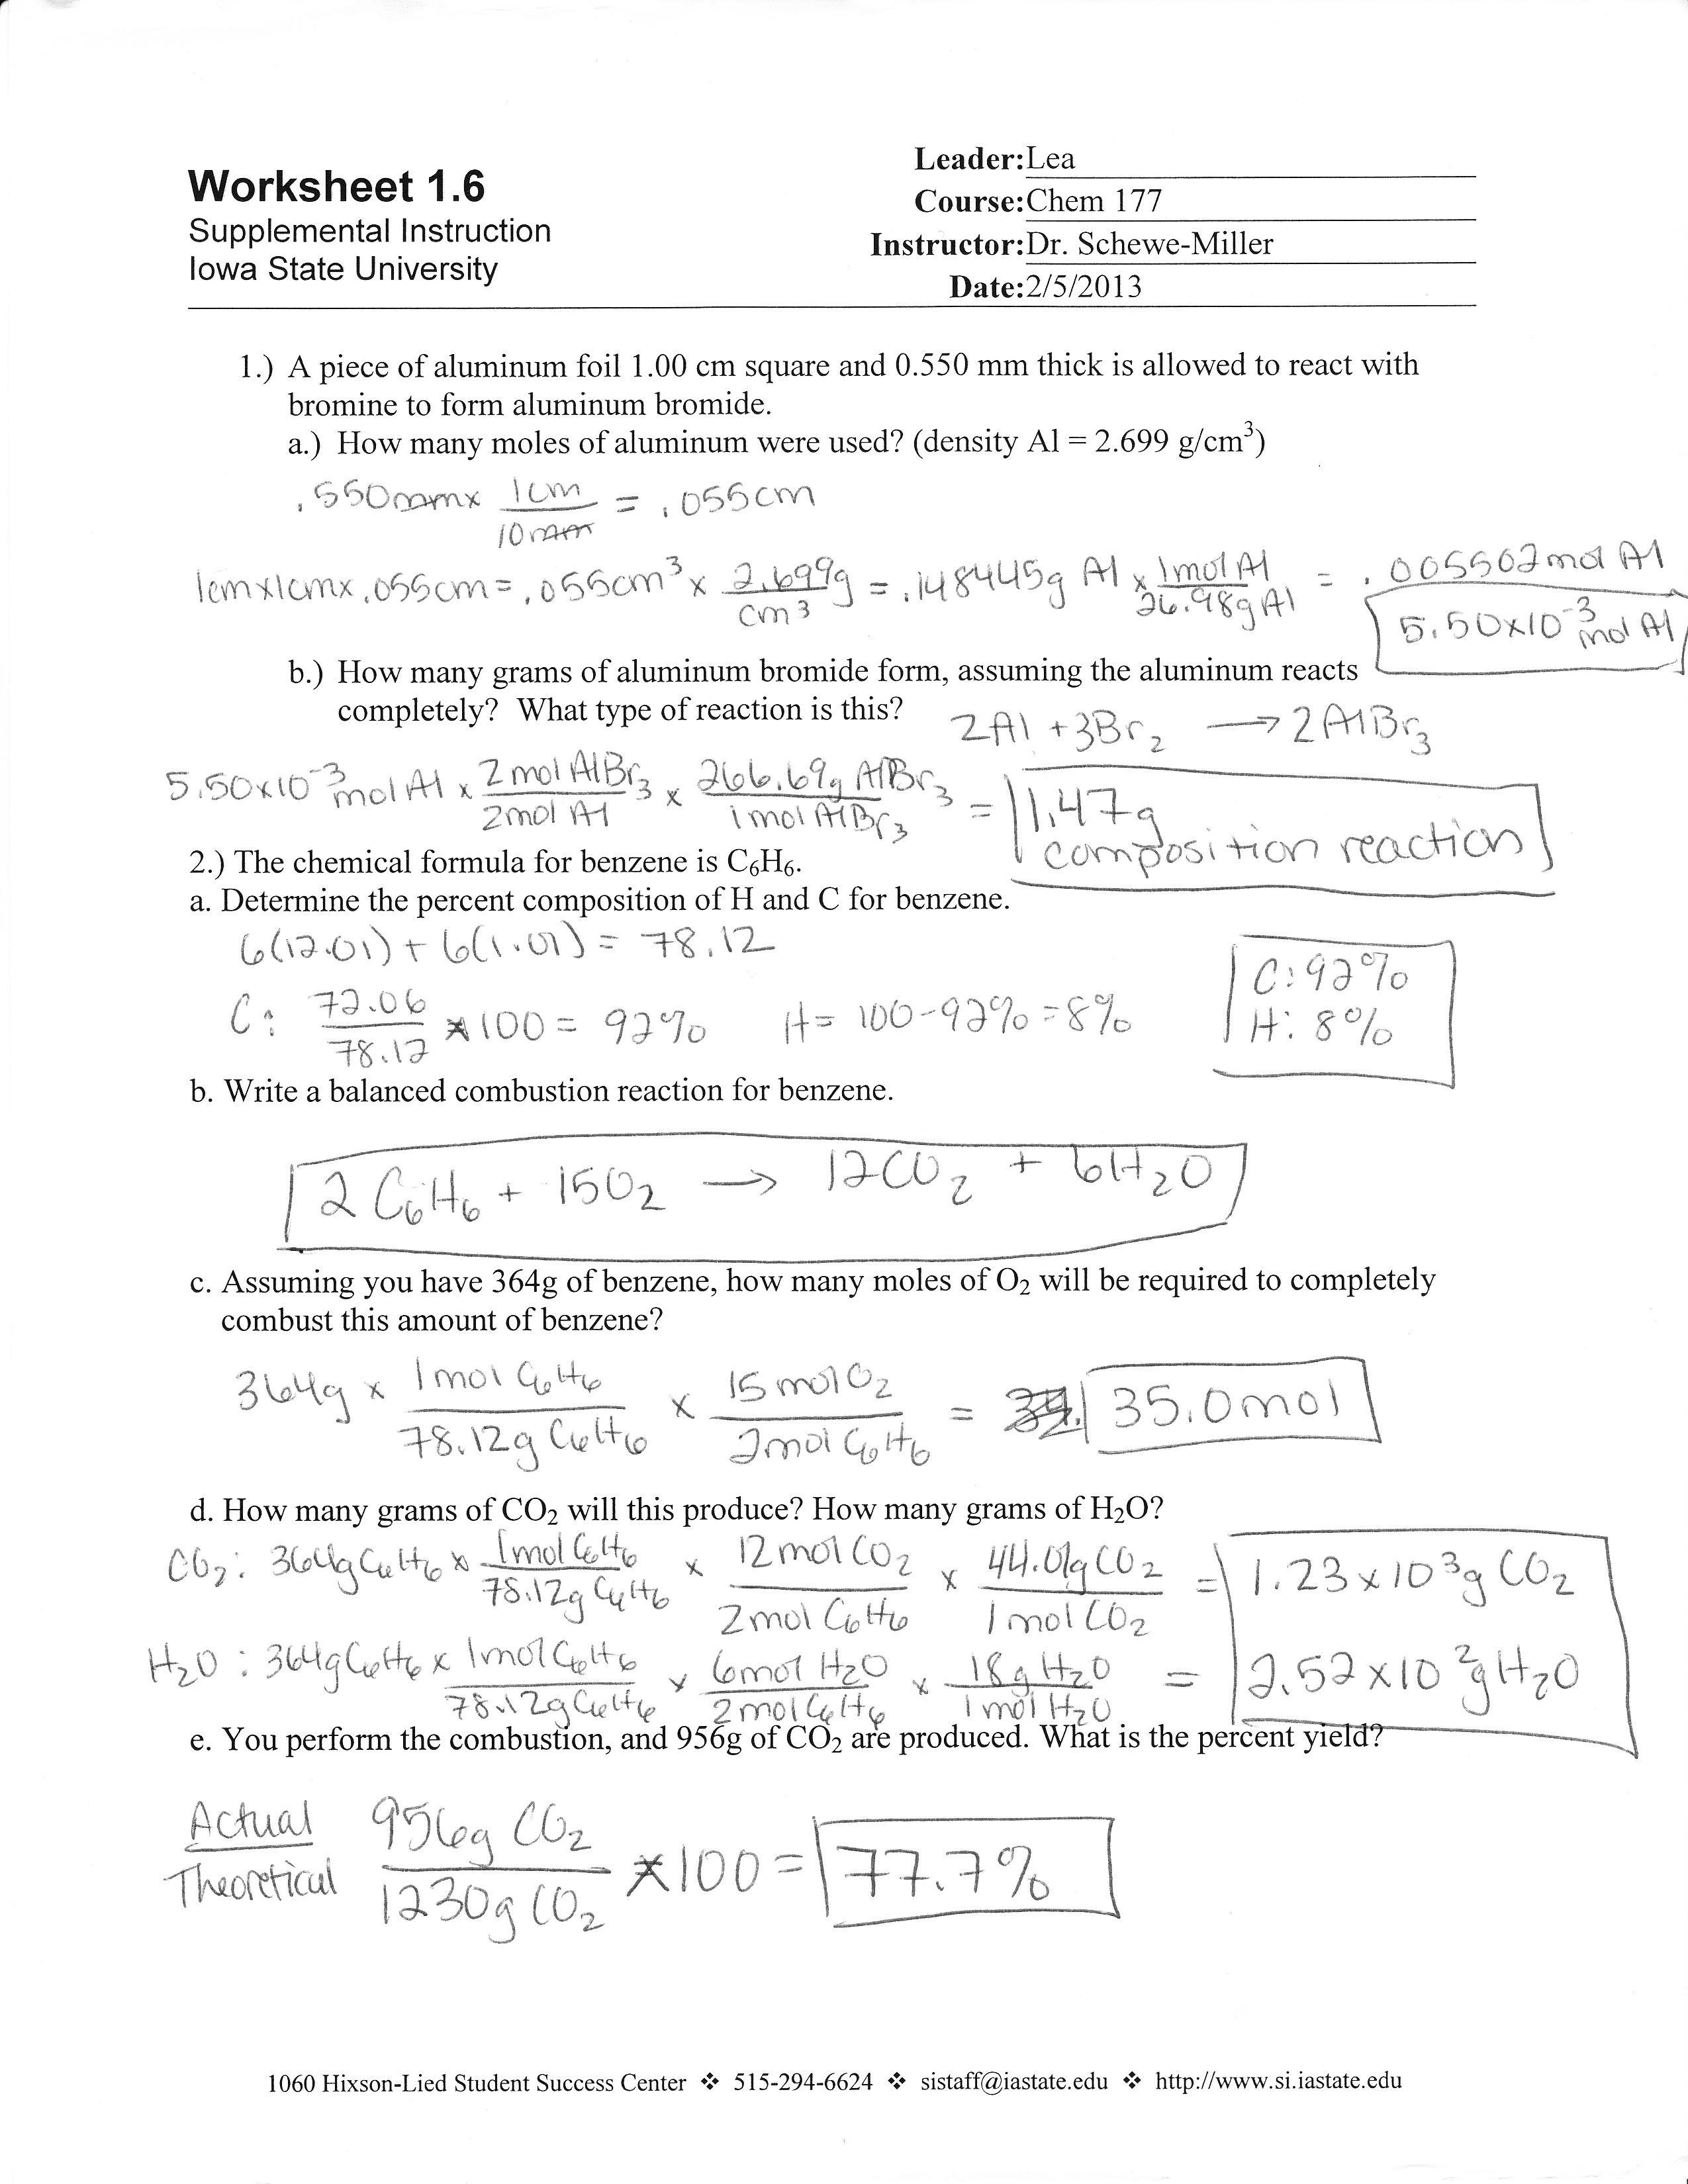 Stoichiometry Practice Worksheet With Answers